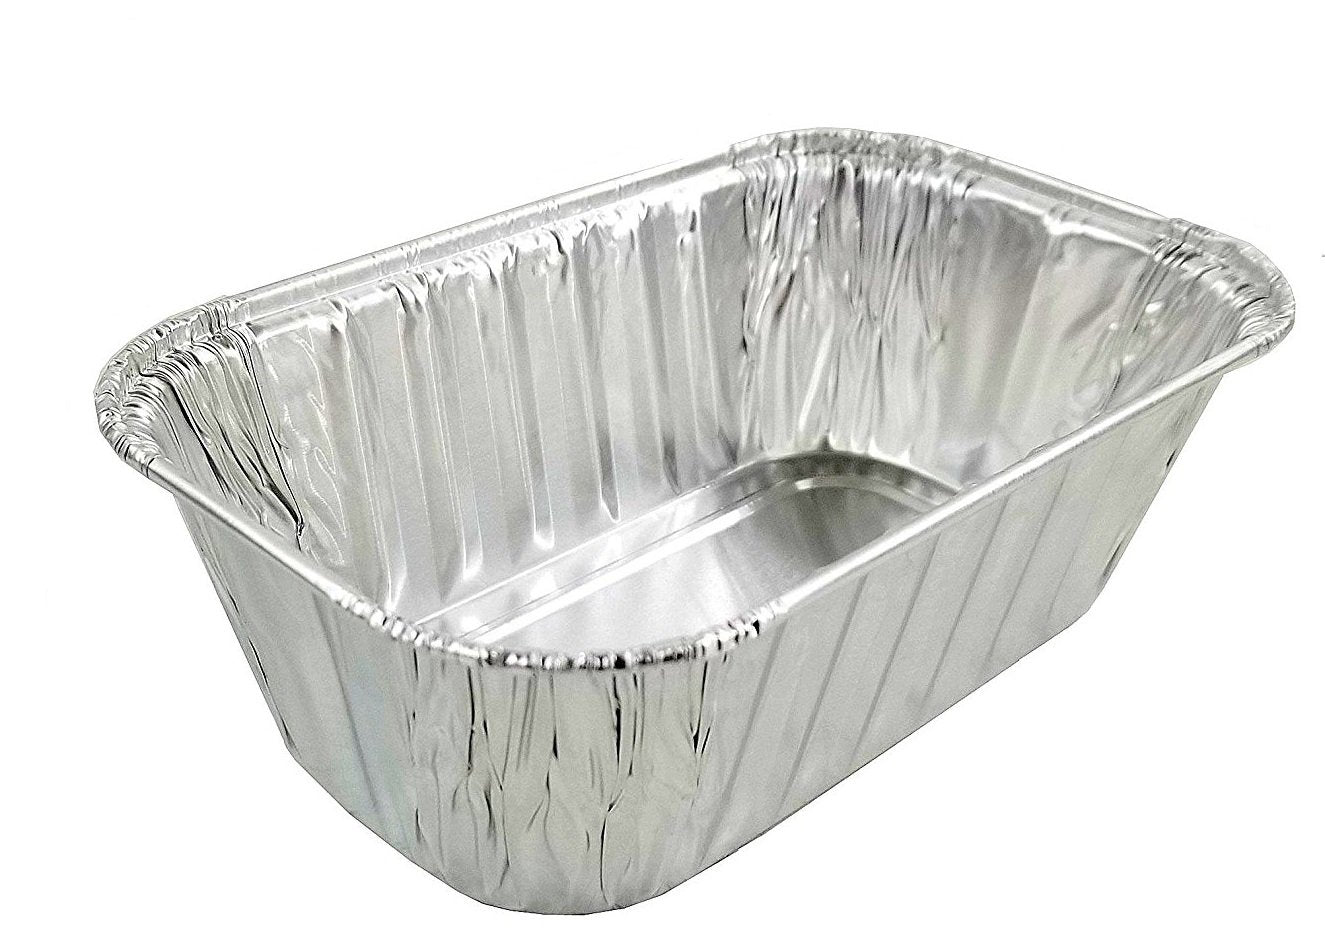 55 Pack - Small 1lb, Aluminum Pans with Lids to Go Containers Disposable Foil Pans Take Out Containers Foil Pan Aluminum Foil Food Containers from